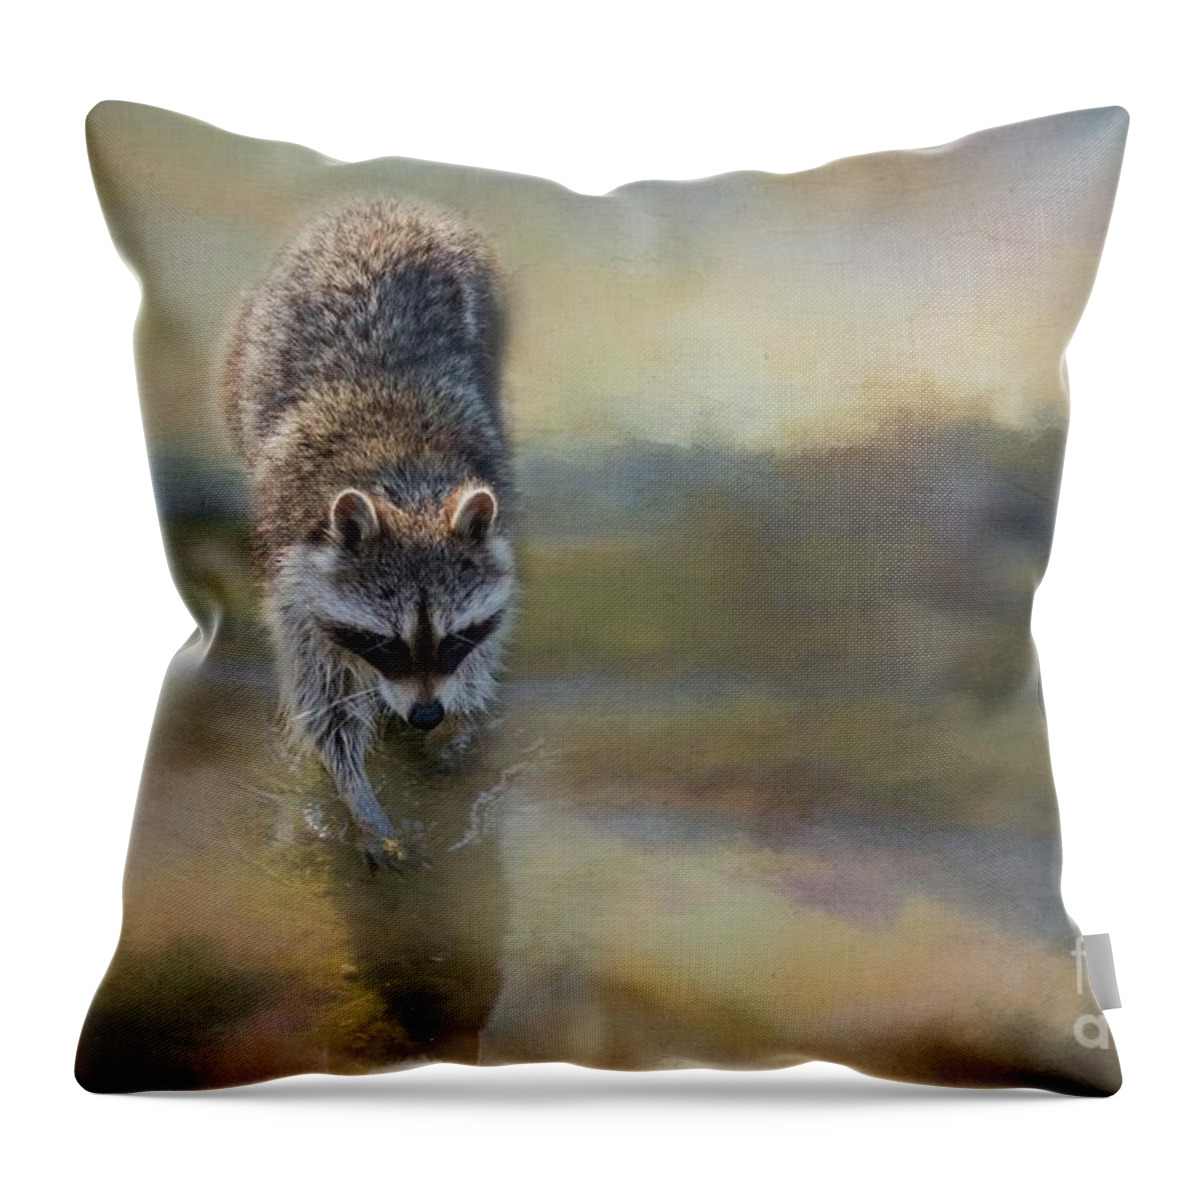 #faatoppicks Throw Pillow featuring the photograph Got Fish? by Eva Lechner